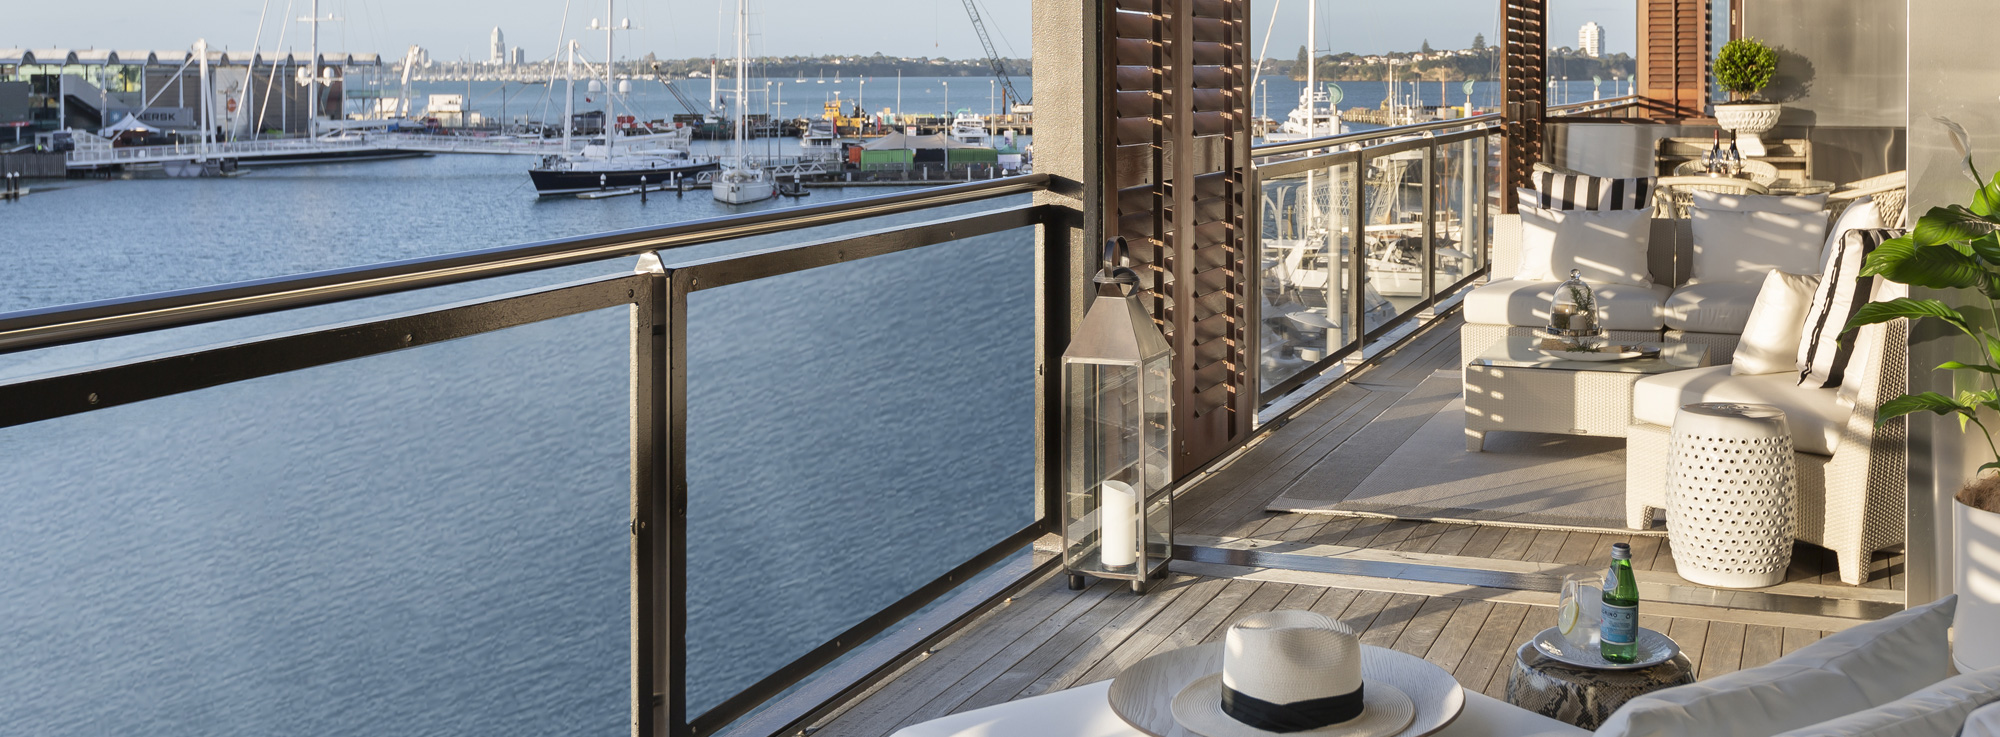 Outdoor Terrace Alfresco Living Room with Viaduct Harbour Views | Point Residence Luxury Auckland Waterfront Accommodation